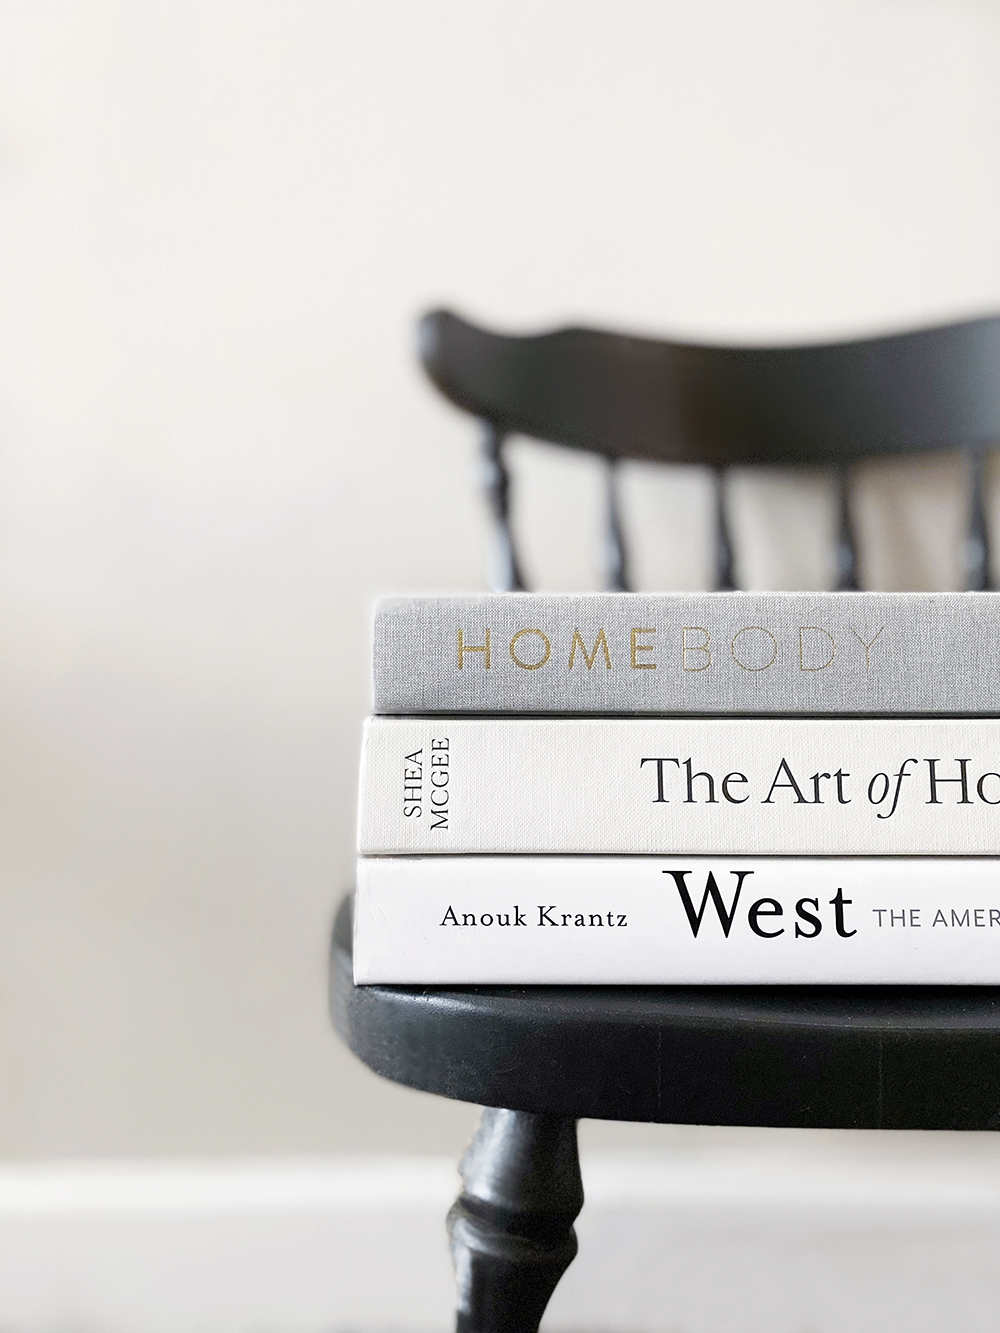 Discover the best aesthetic coffee table books to elevate your home decor. From fashion to interior design, I'm sharing my beautifully curated recommendations that add style and character to any space. Click to explore my top picks!